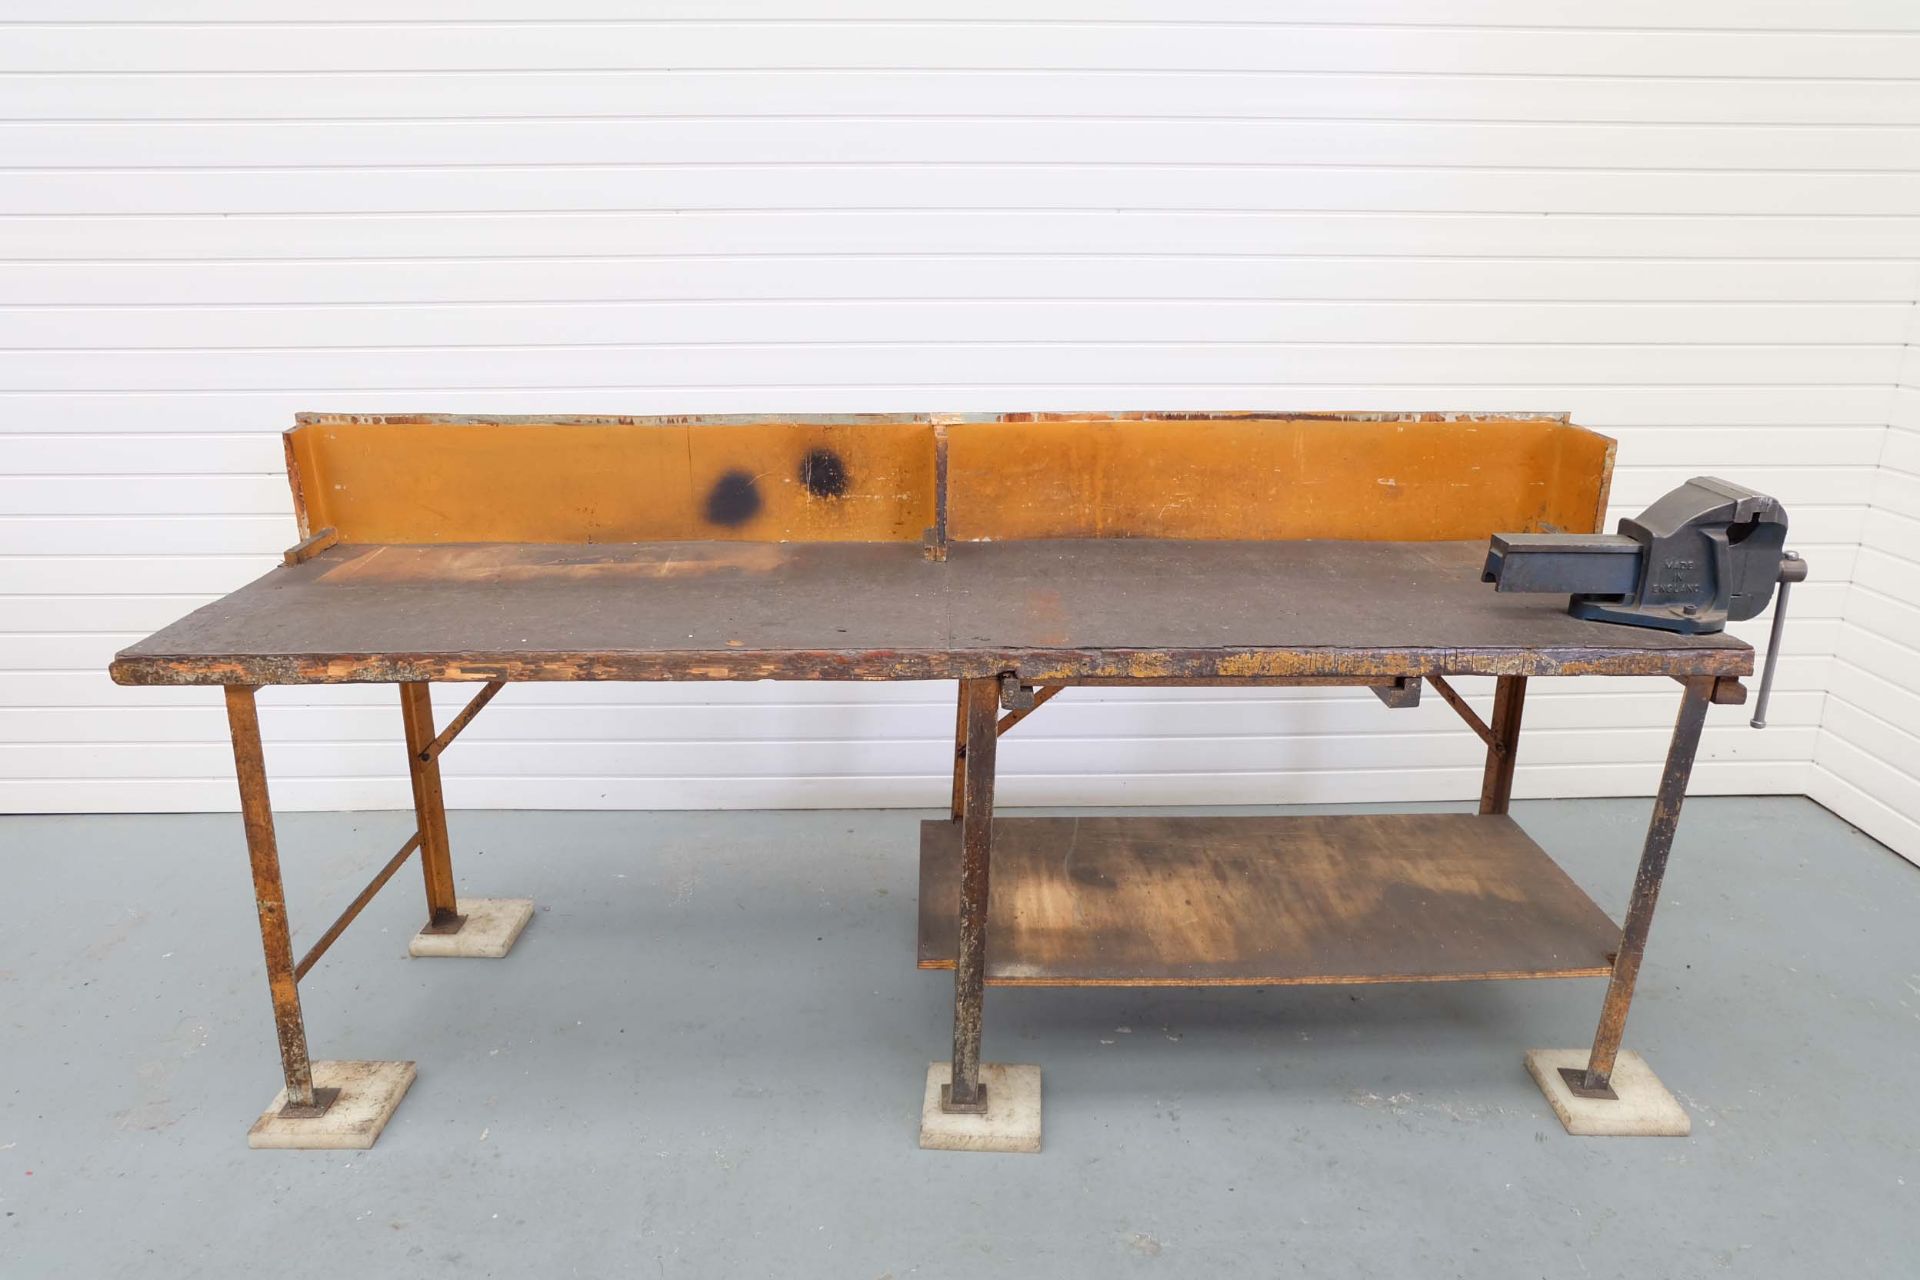 2" Thick Timber Bench on Steel Stand. Size: 96" x 27". With Record No.6 Vice.